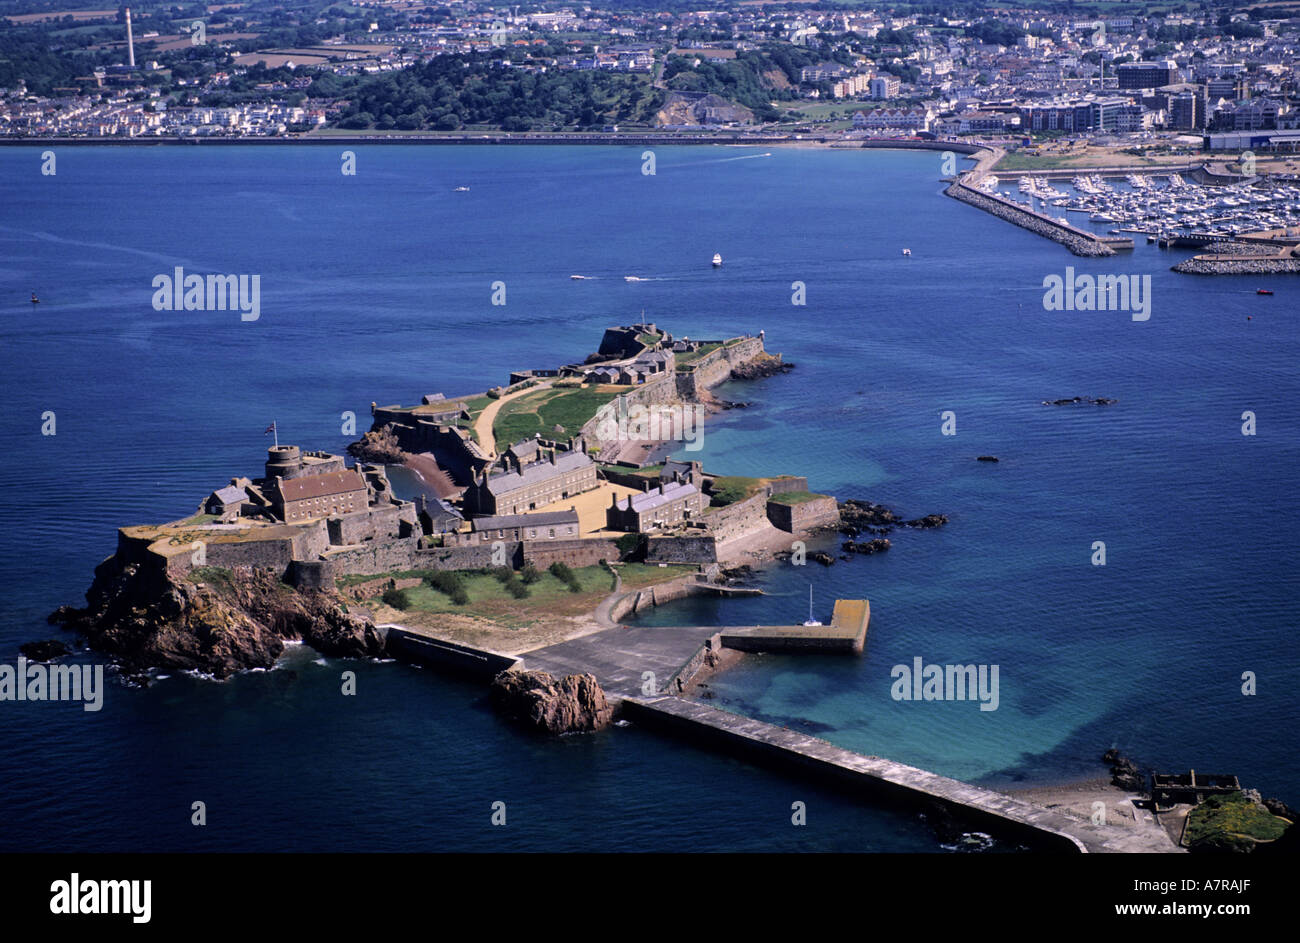 United Kingdom, Channel Islands, Jersey island, Elisabeth Castle in front  of St Helier (aerial view Stock Photo - Alamy